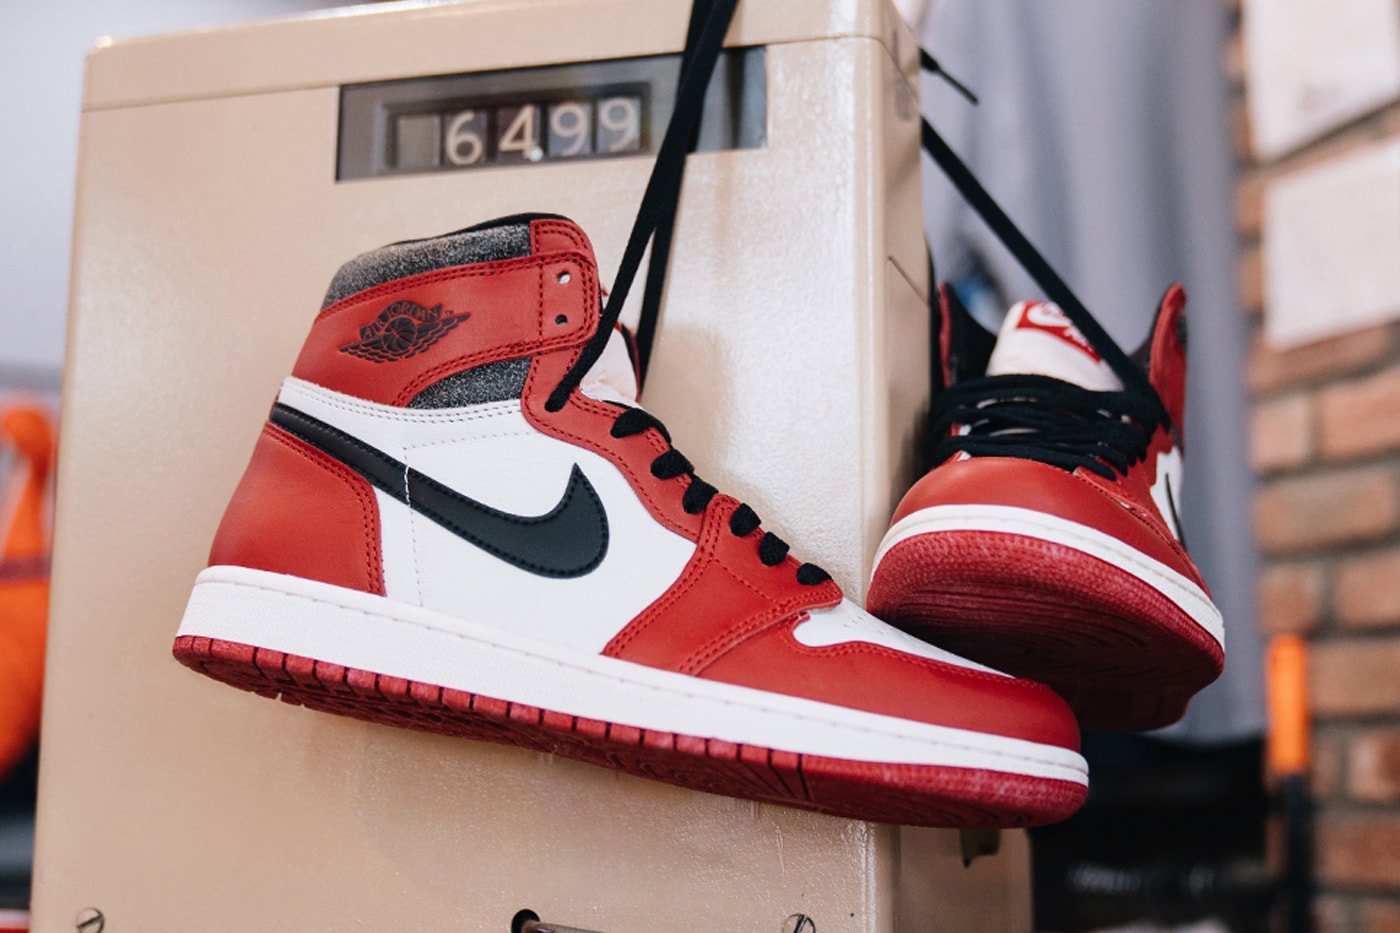 air michael jordan brand 1985 chicago reimagined lost and found sneaker restock 2023 nike snkrs dz5485 612 official release date info photos price store list buying guide